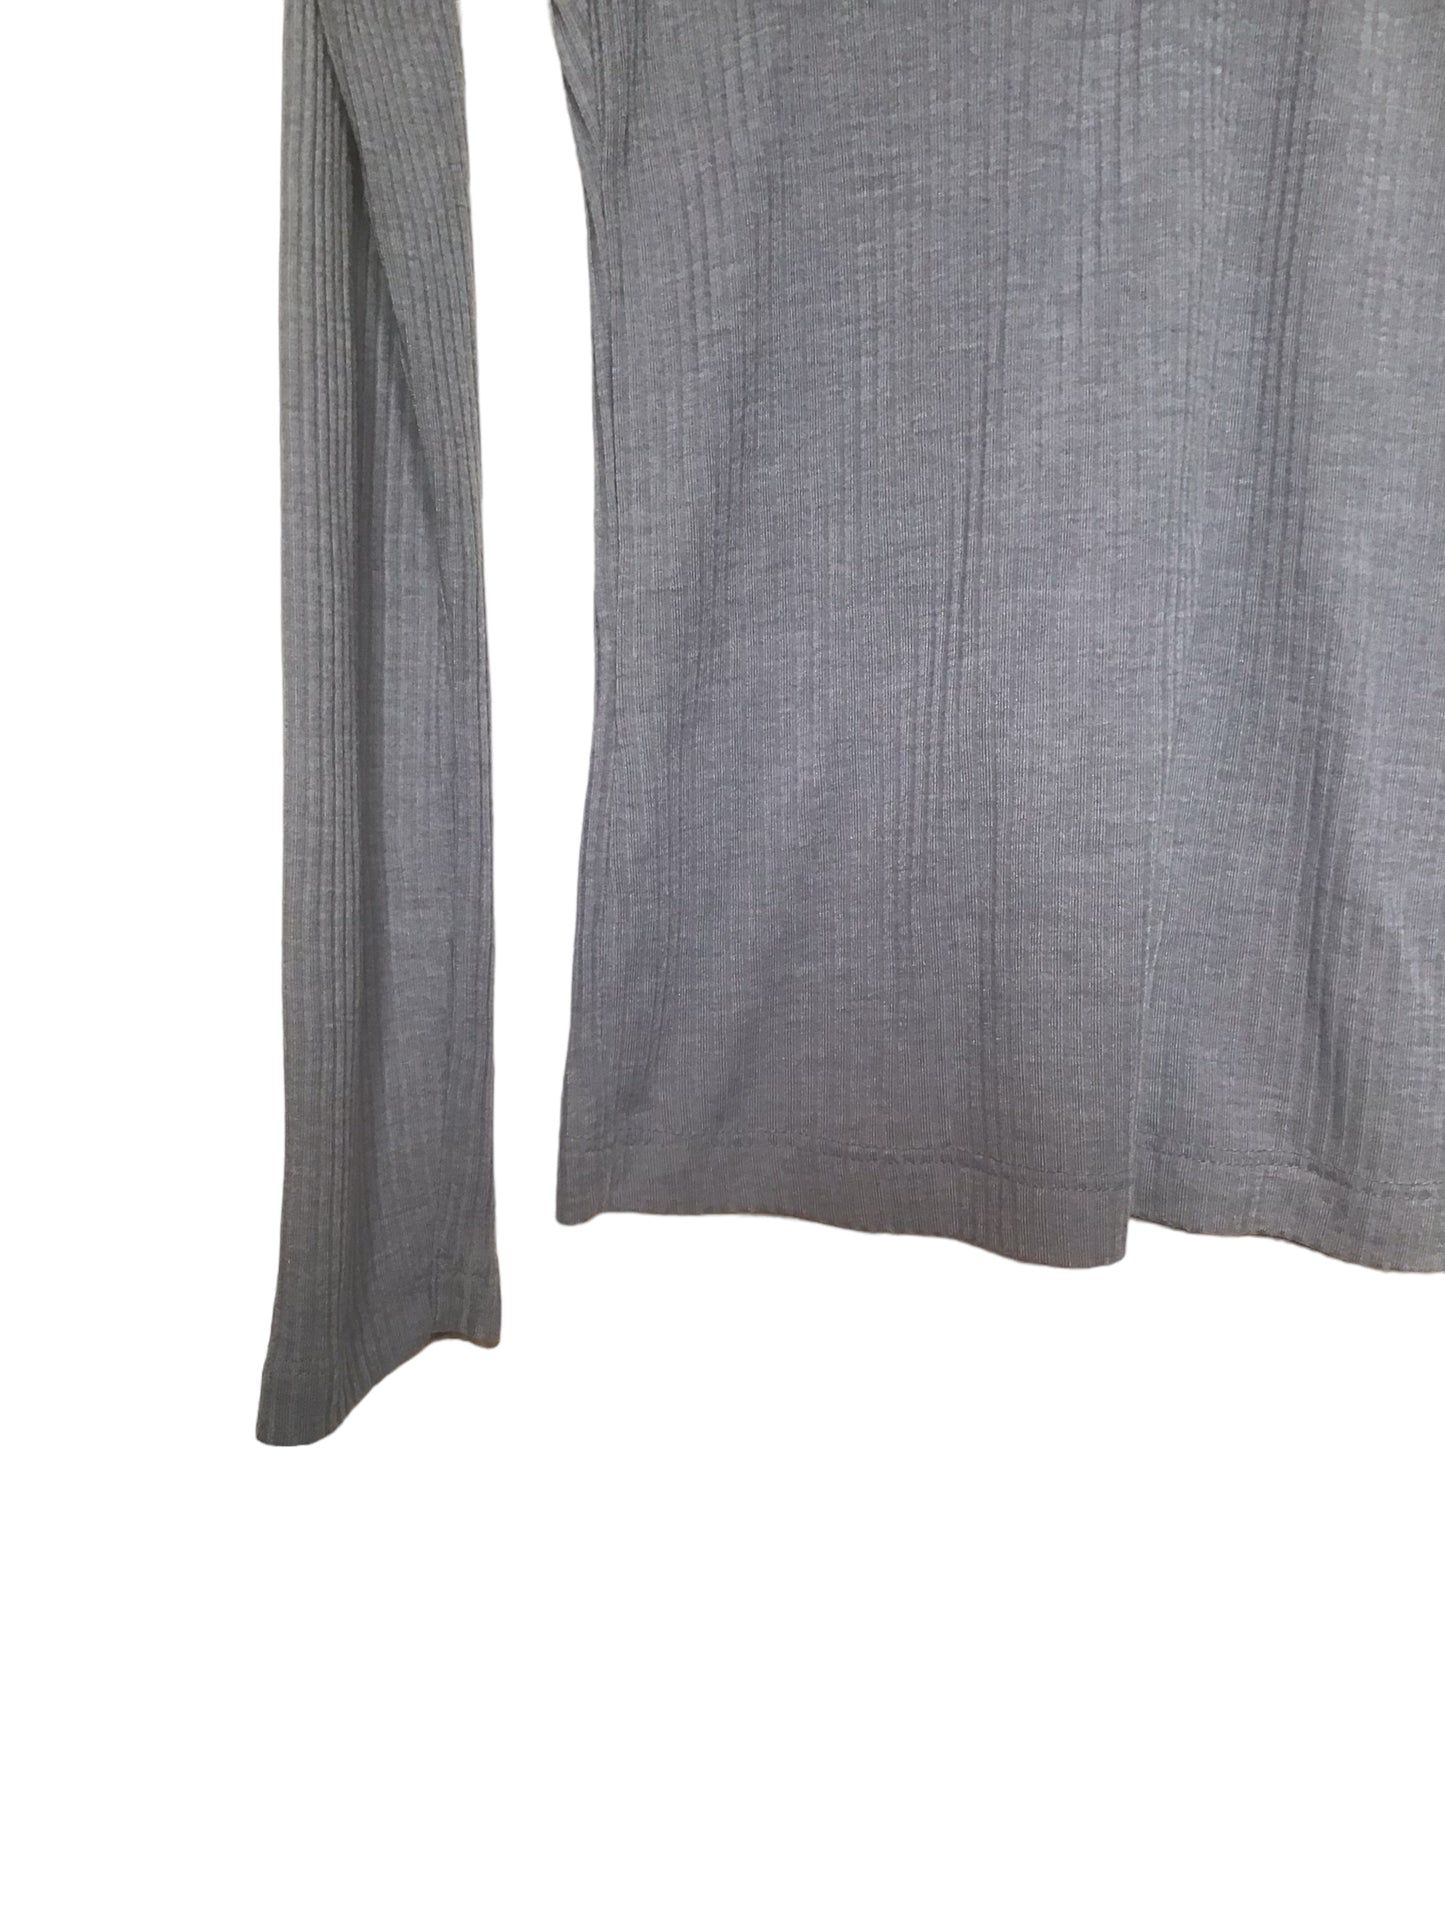 G:21 Long Sleeved Top (Size L)